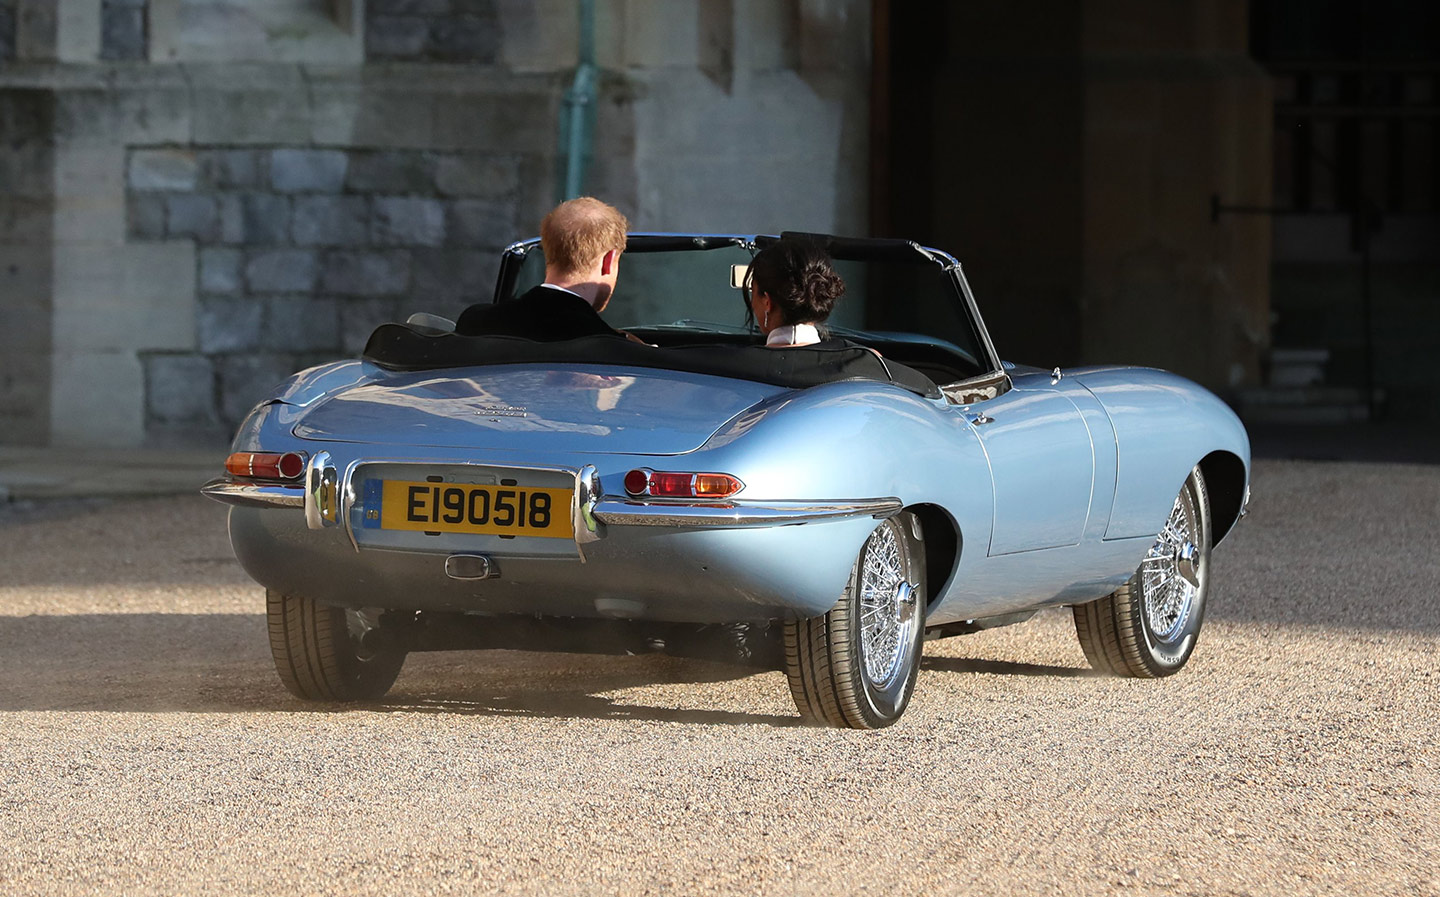 Video: Prince Harry and Meghan Markle drive electric Jaguar E-Type to Royal wedding reception